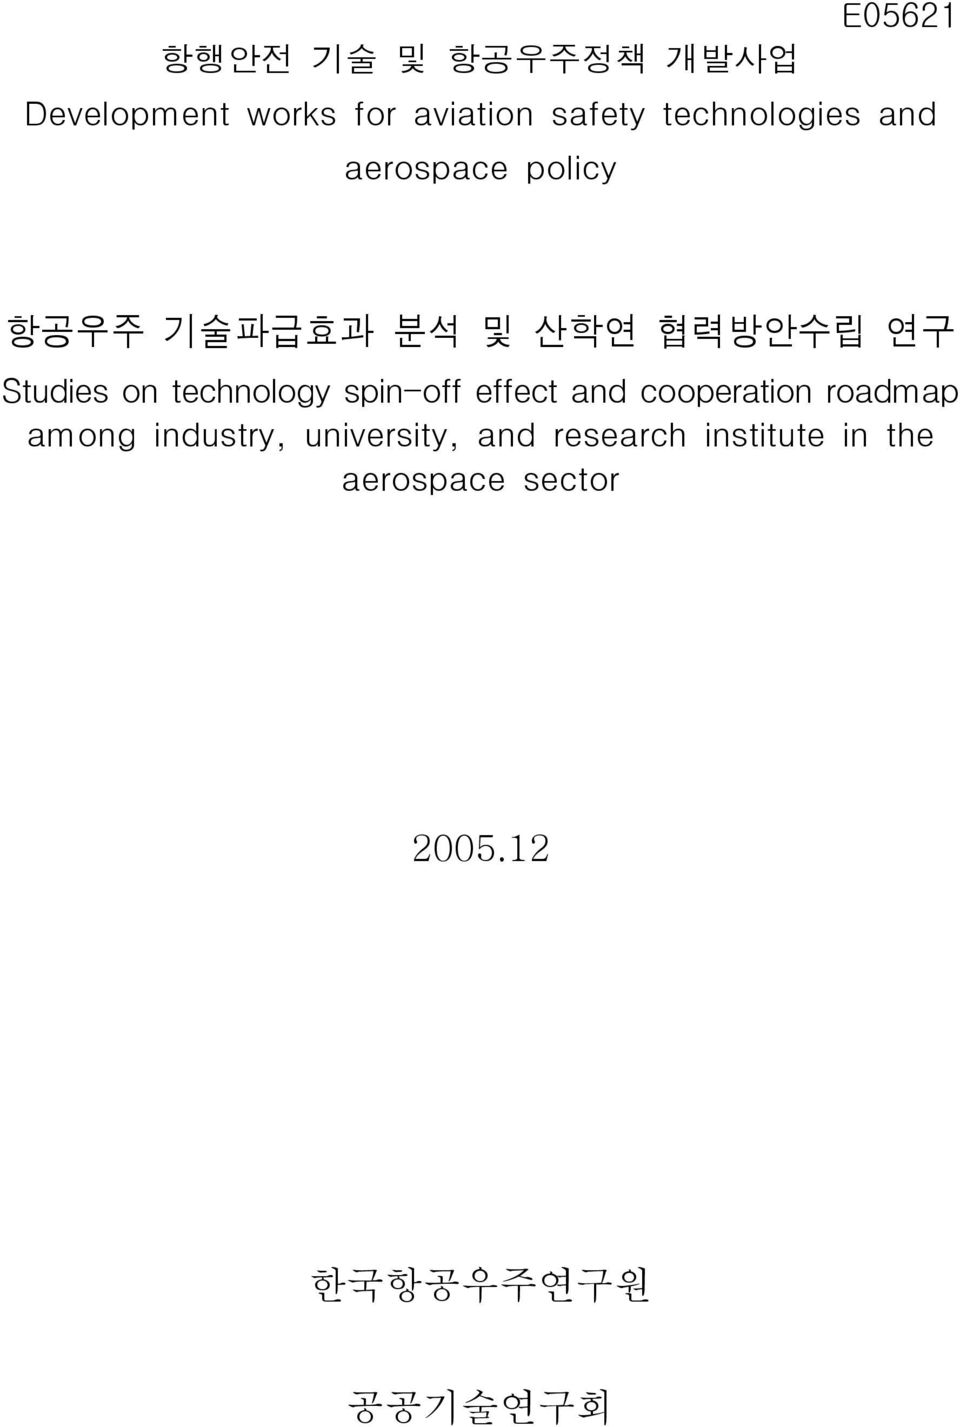 on technology spin-off effect and cooperation roadmap among industry,